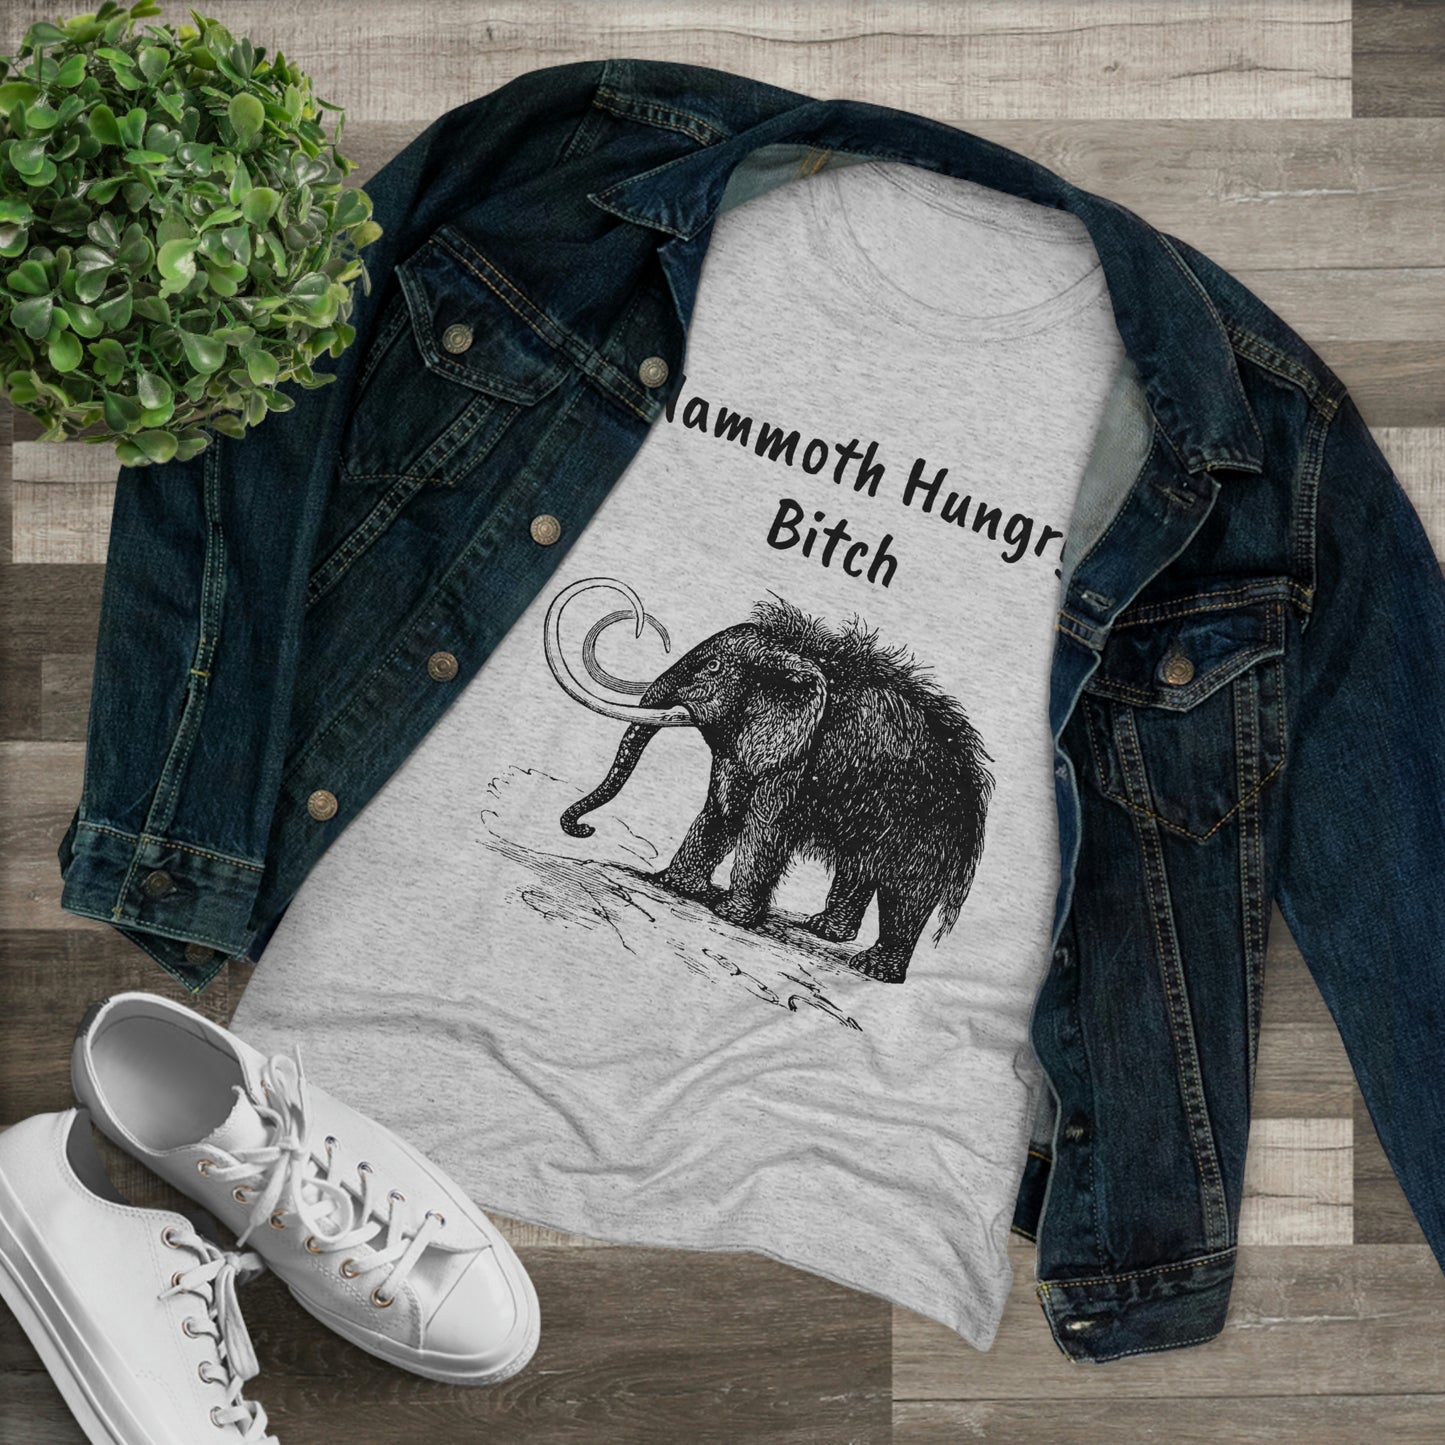 Roxy Rich Comedy funny quote "Mammoth Hungry Bitch" Women's fitted Triblend Tee